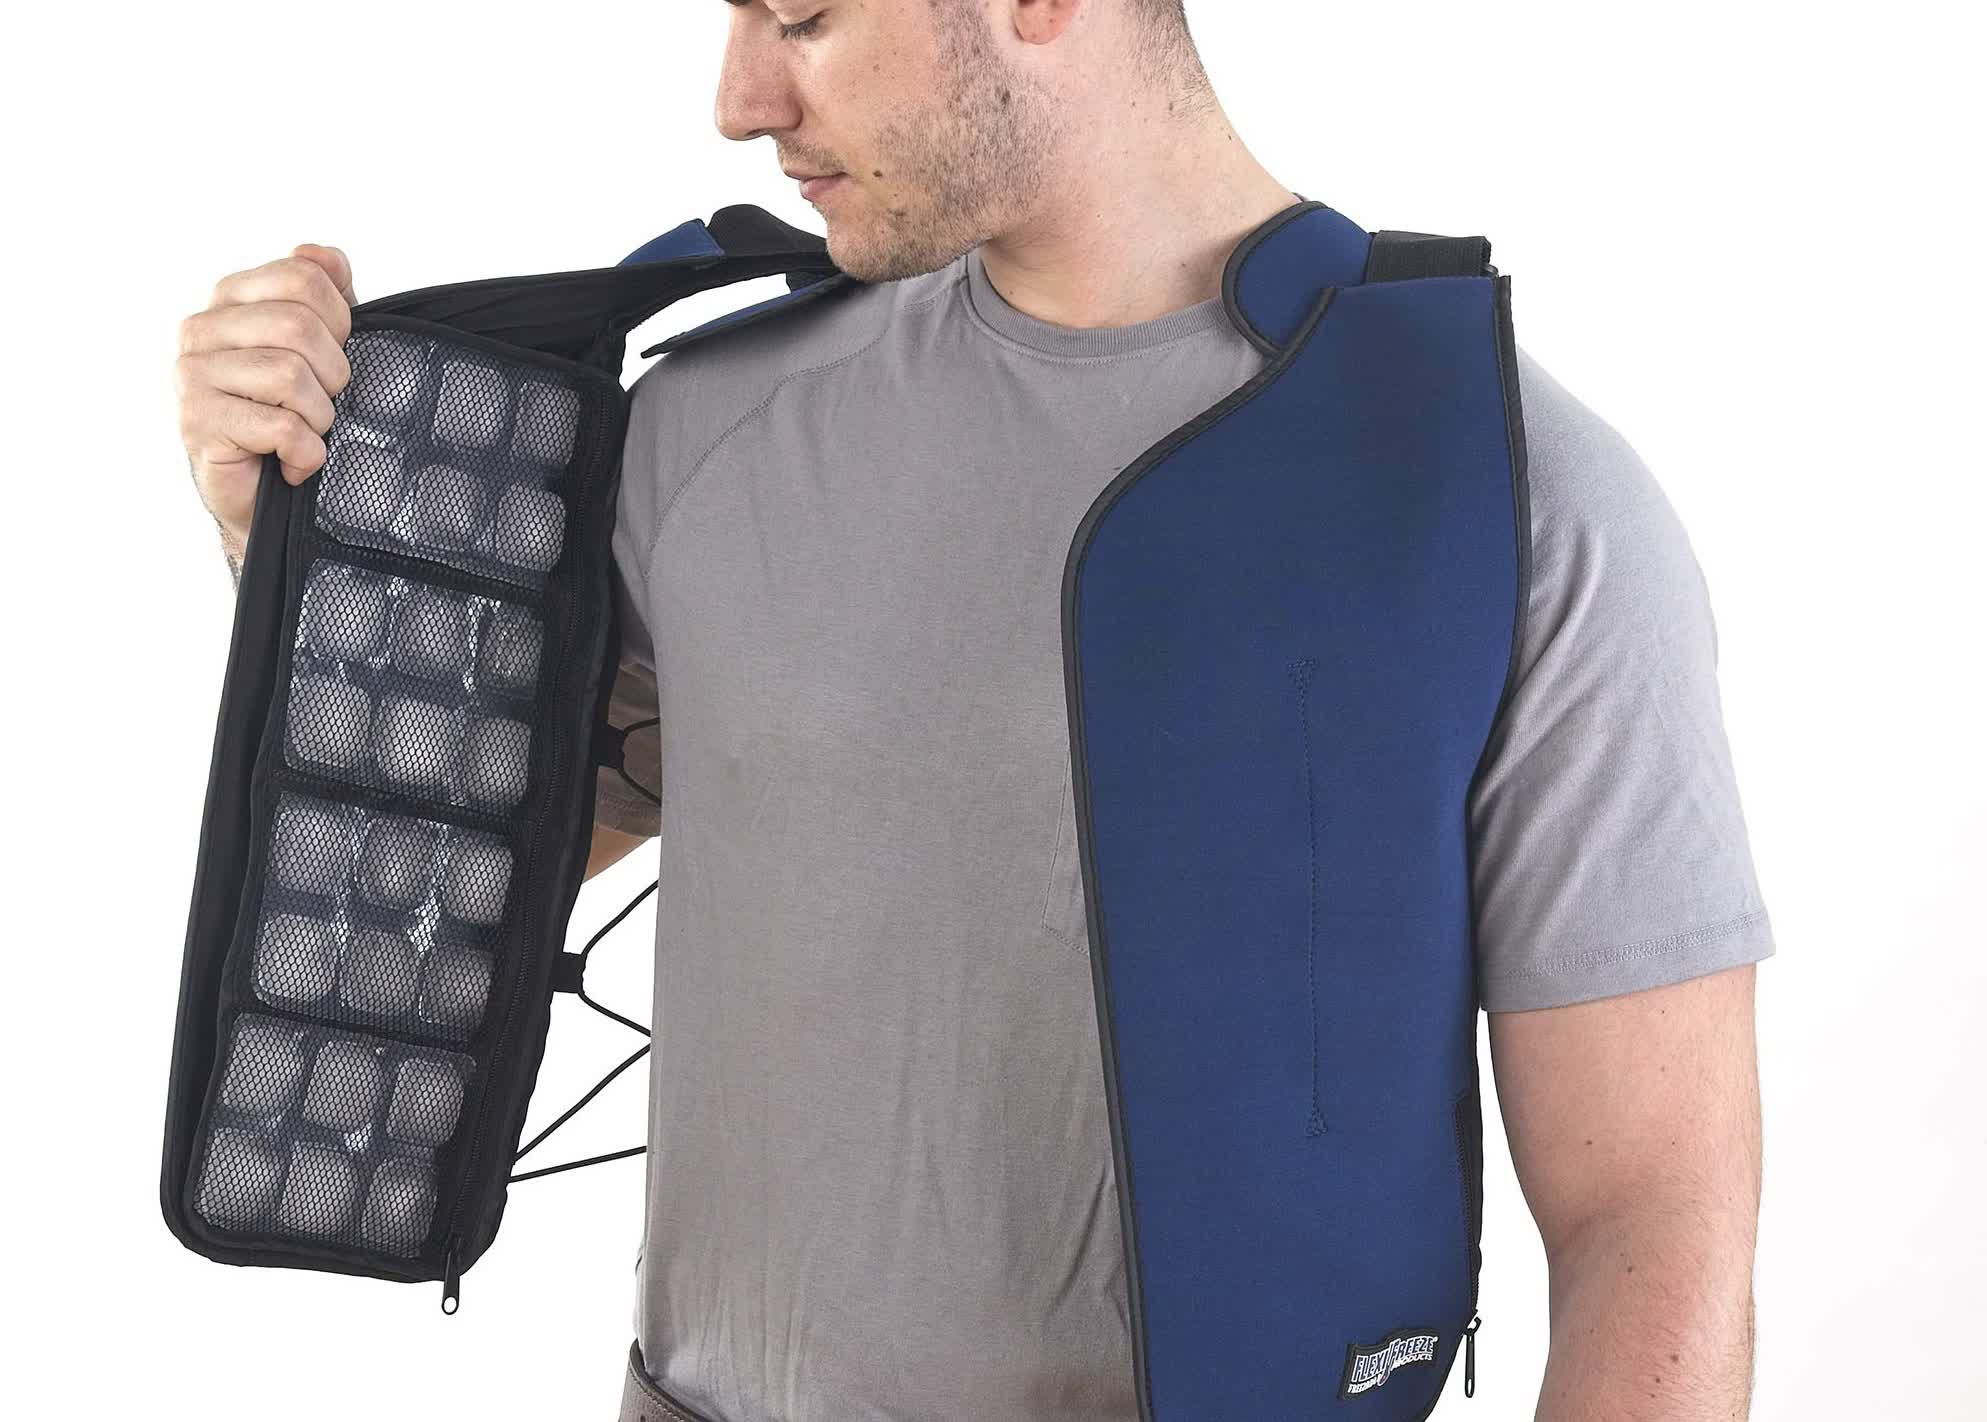 Cooling vests see hot demand as global temperatures rise